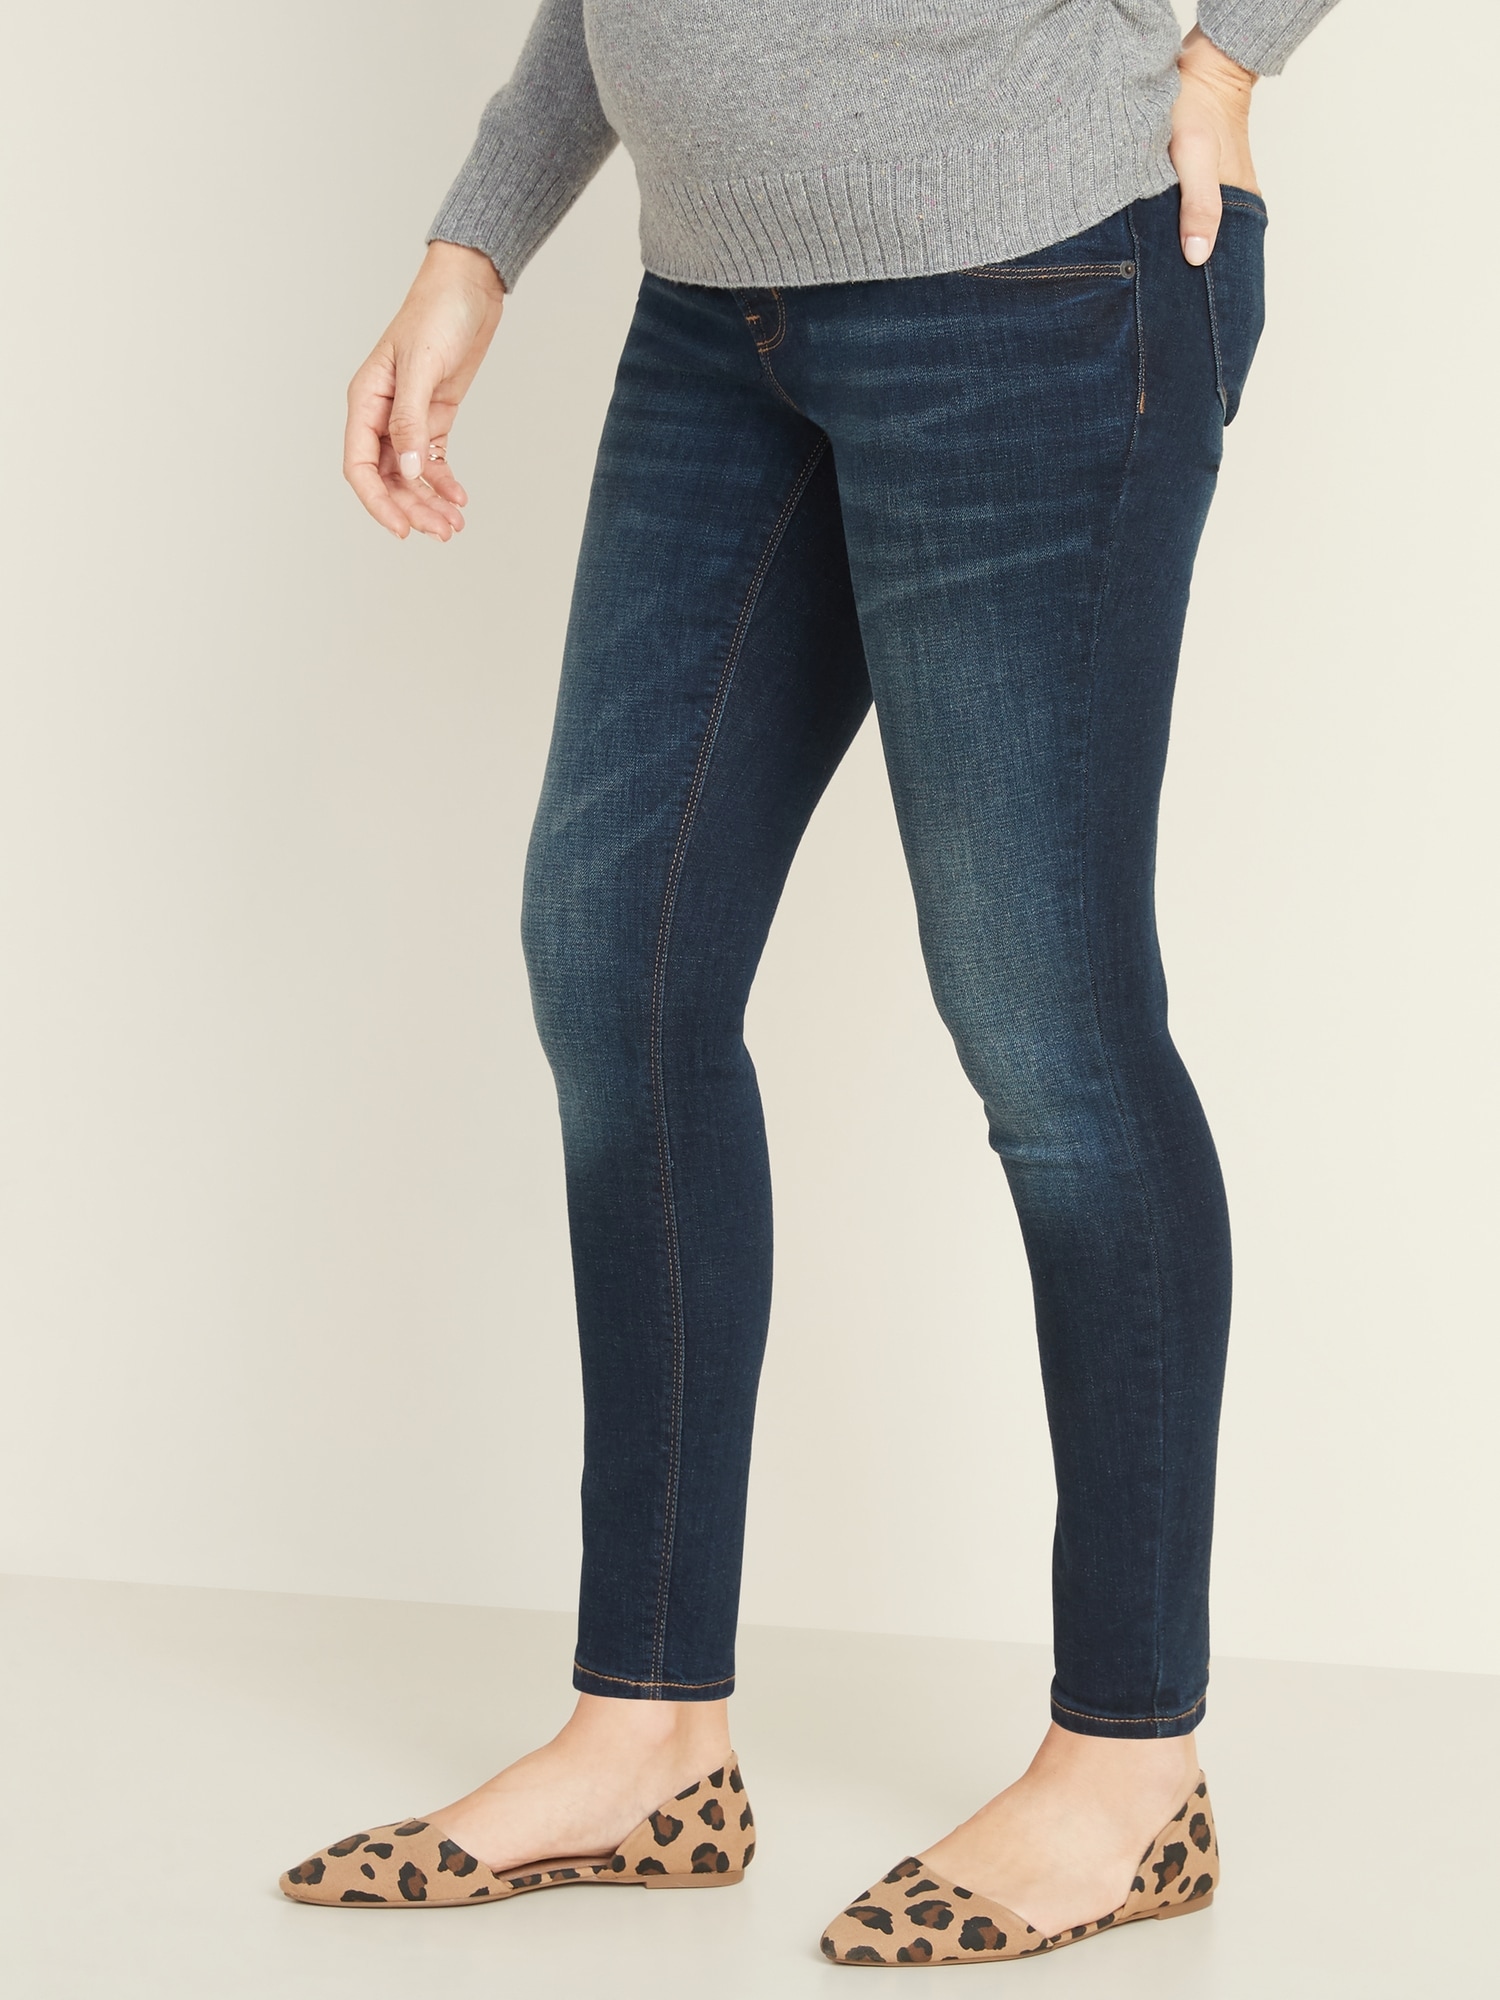 difference between old navy rockstar and super skinny jeans